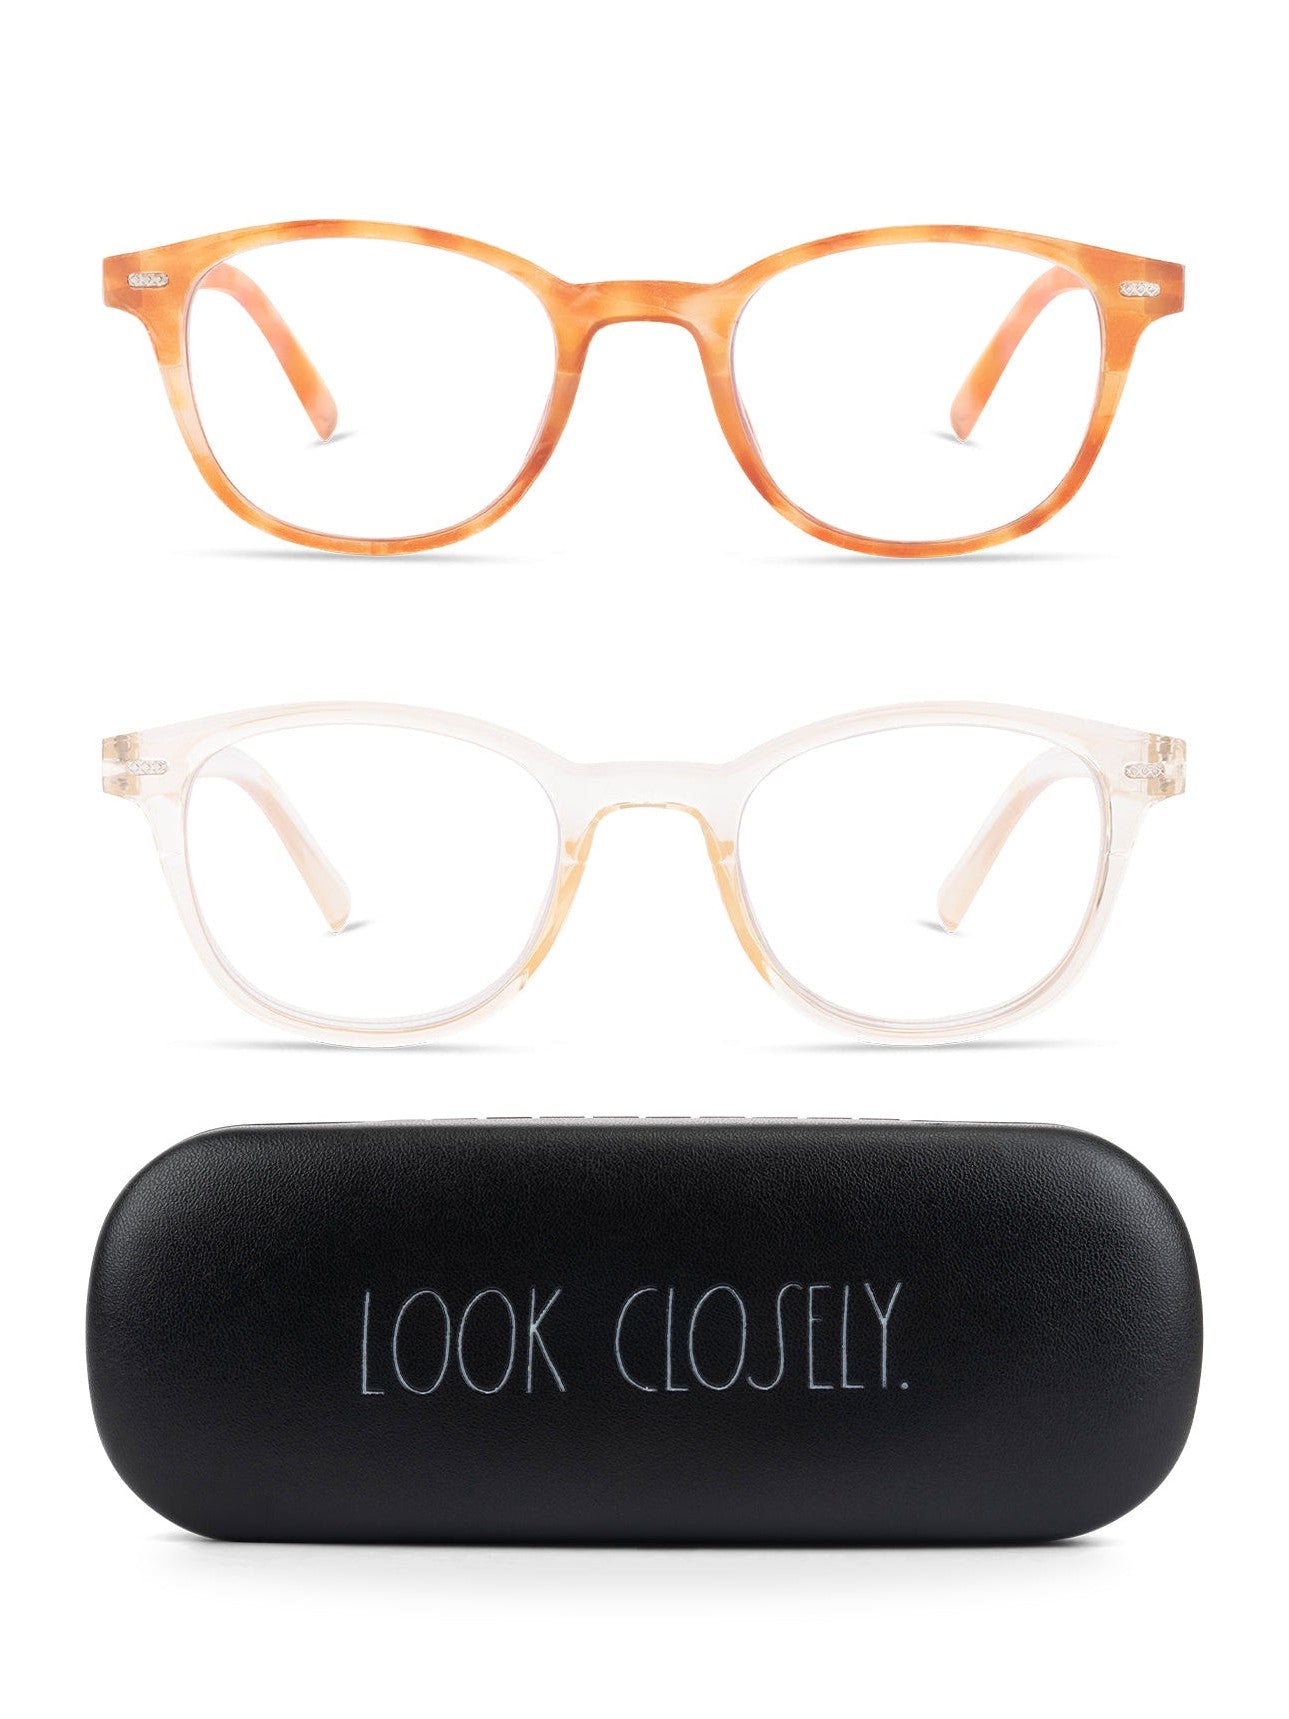 ELIZA 2-Pack Blue Light Blocking Reading Glasses with "LOOK CLOSELY" Signature Font Hard Case - Rae Dunn Wear